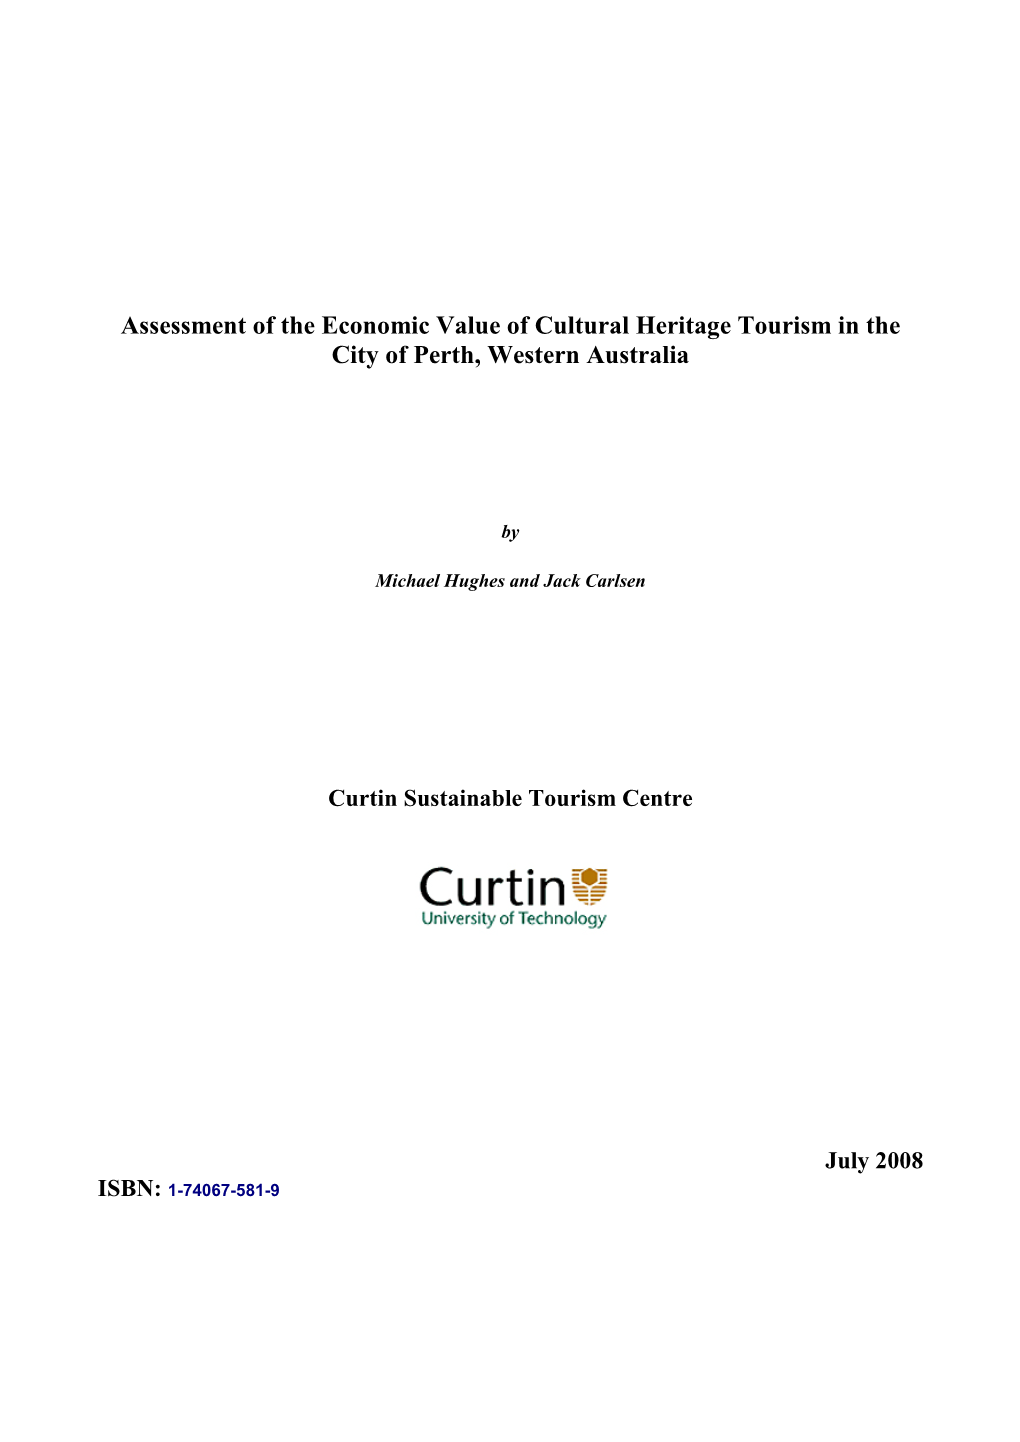 Assessment of the Economic Value of Cultural Heritage Tourism in the City of Perth, Western Australia